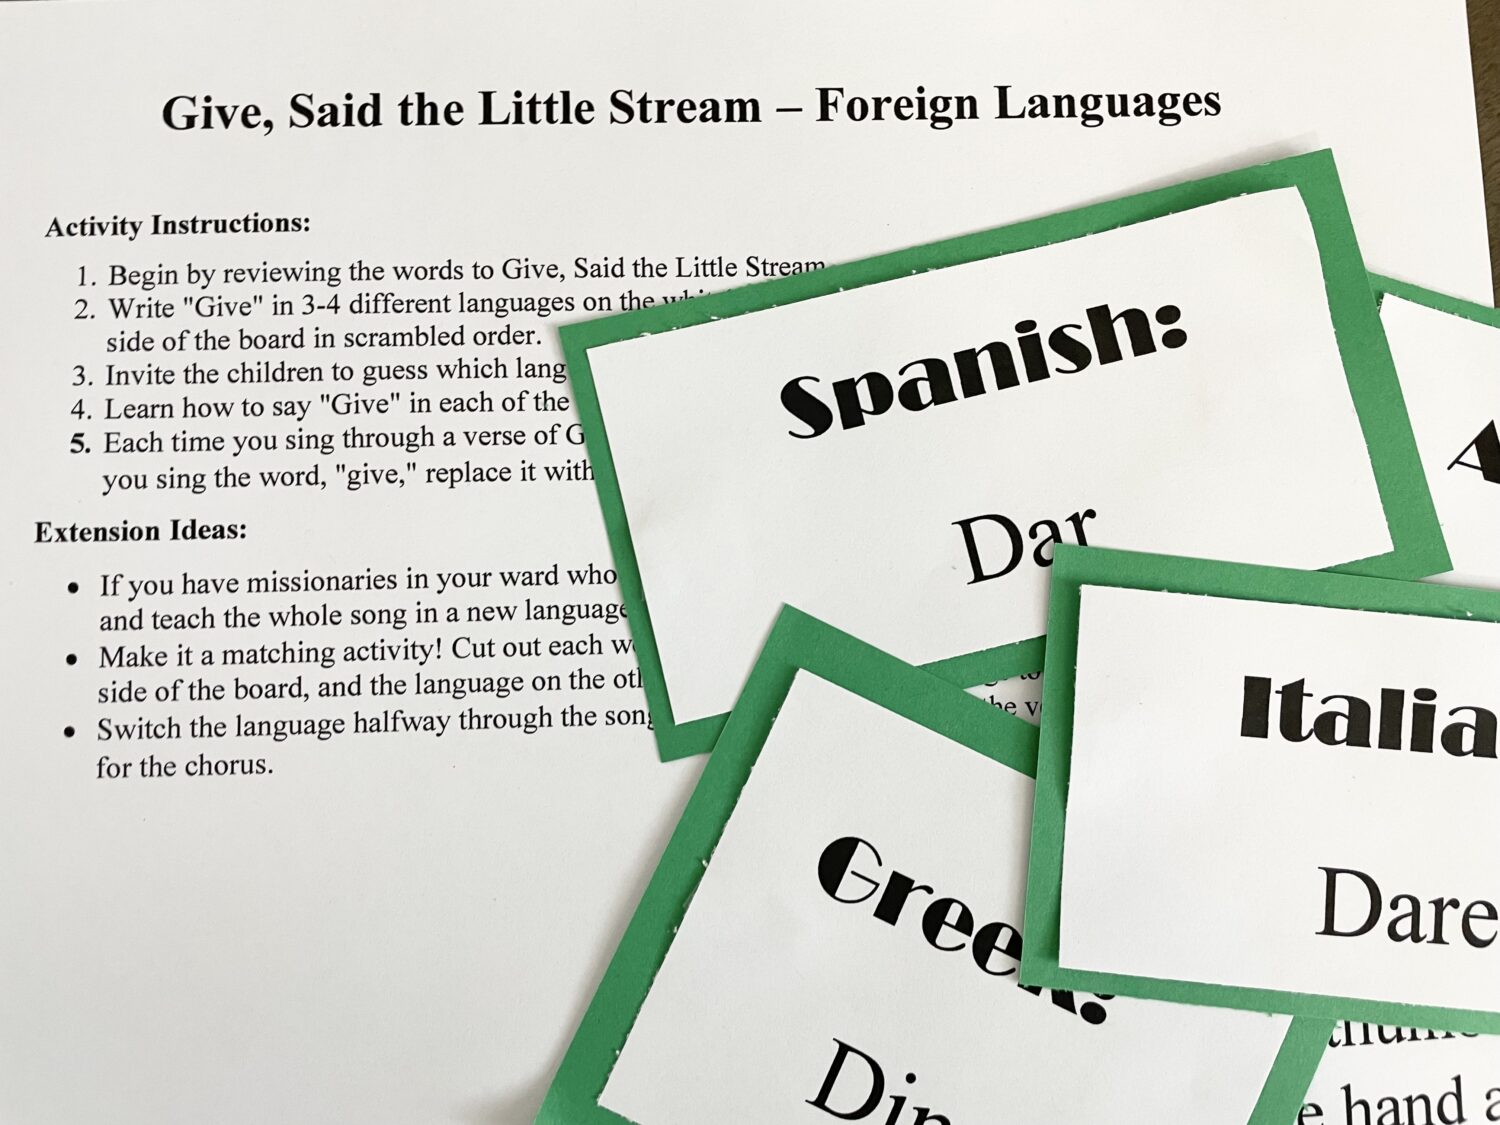 Give, Said the Little Stream - Foreign Language Easy ideas for Music Leaders IMG 6179 e1647123561647